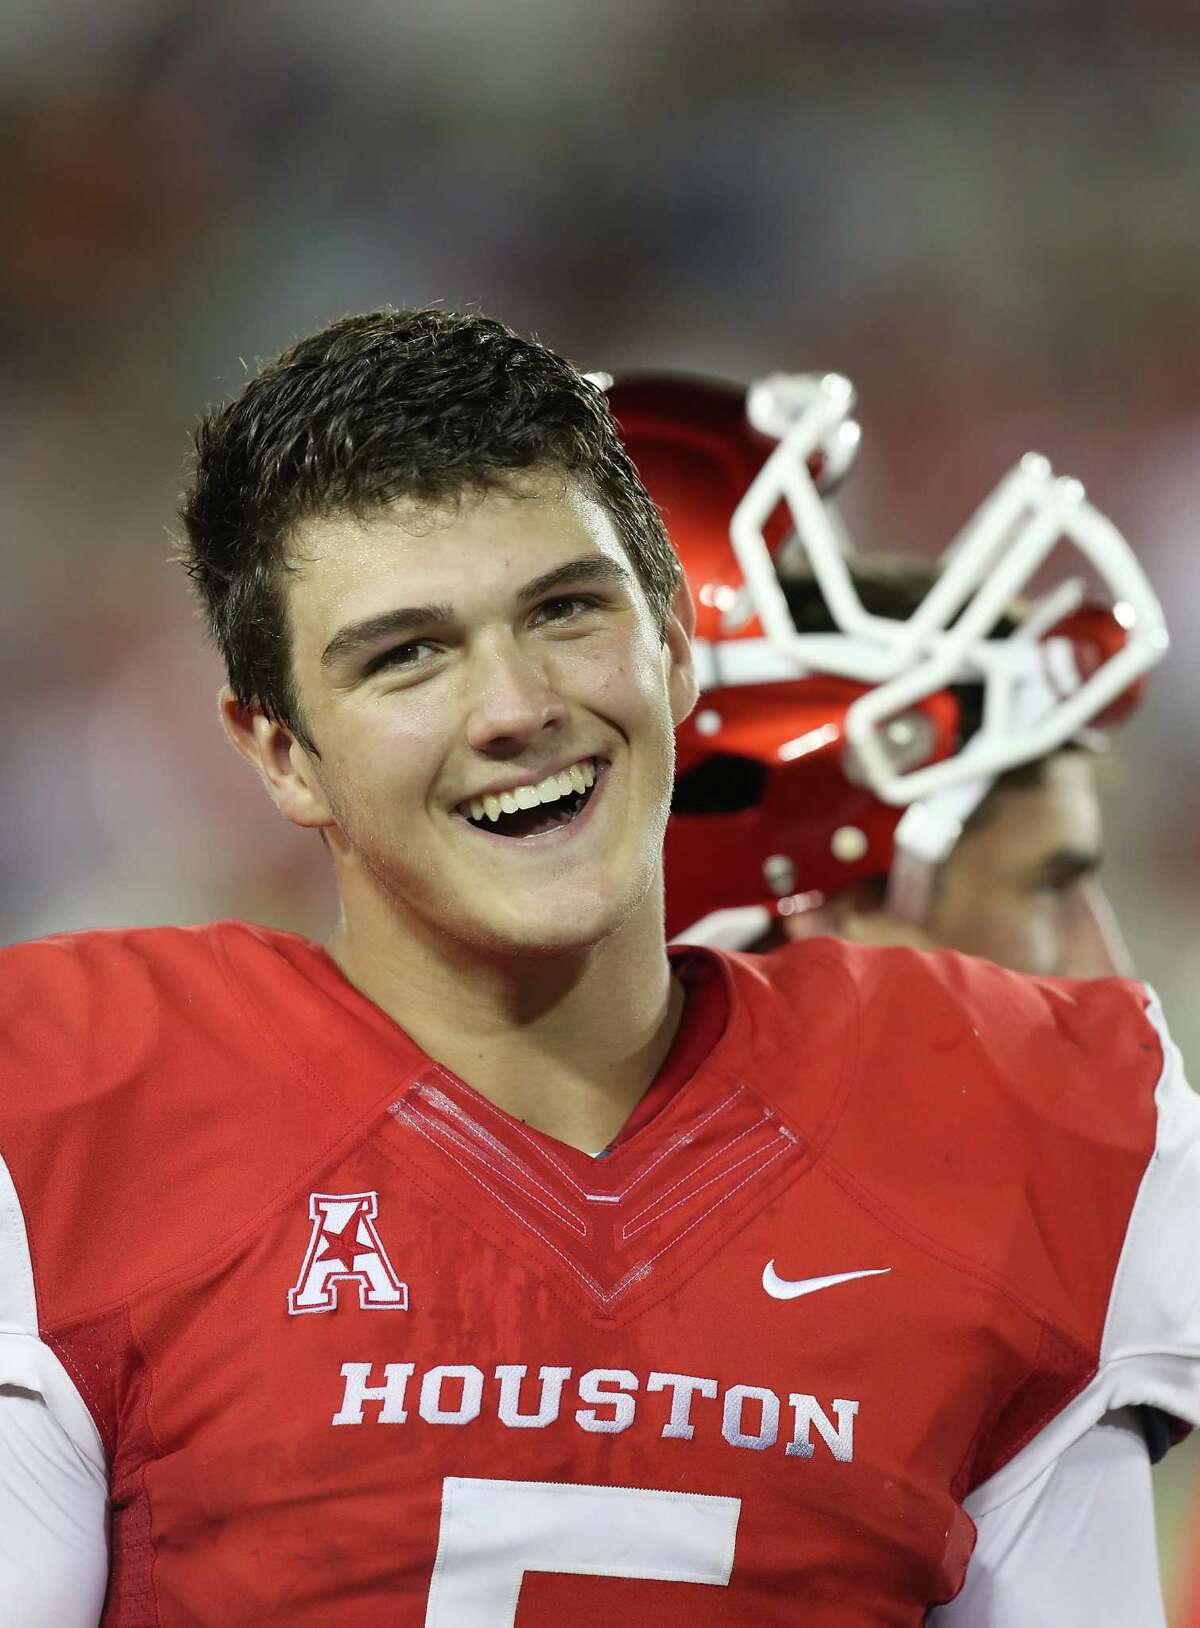 Houston Cougars quarterback John O'Korn (5) smiles after watching the second string score against the Grambling State Tigers in the second half on September 6, 2014 at John O'Quinn Field at TDECU Stadium in Houston, TX. (Photo: Thomas B. Shea/For the Chronicle)